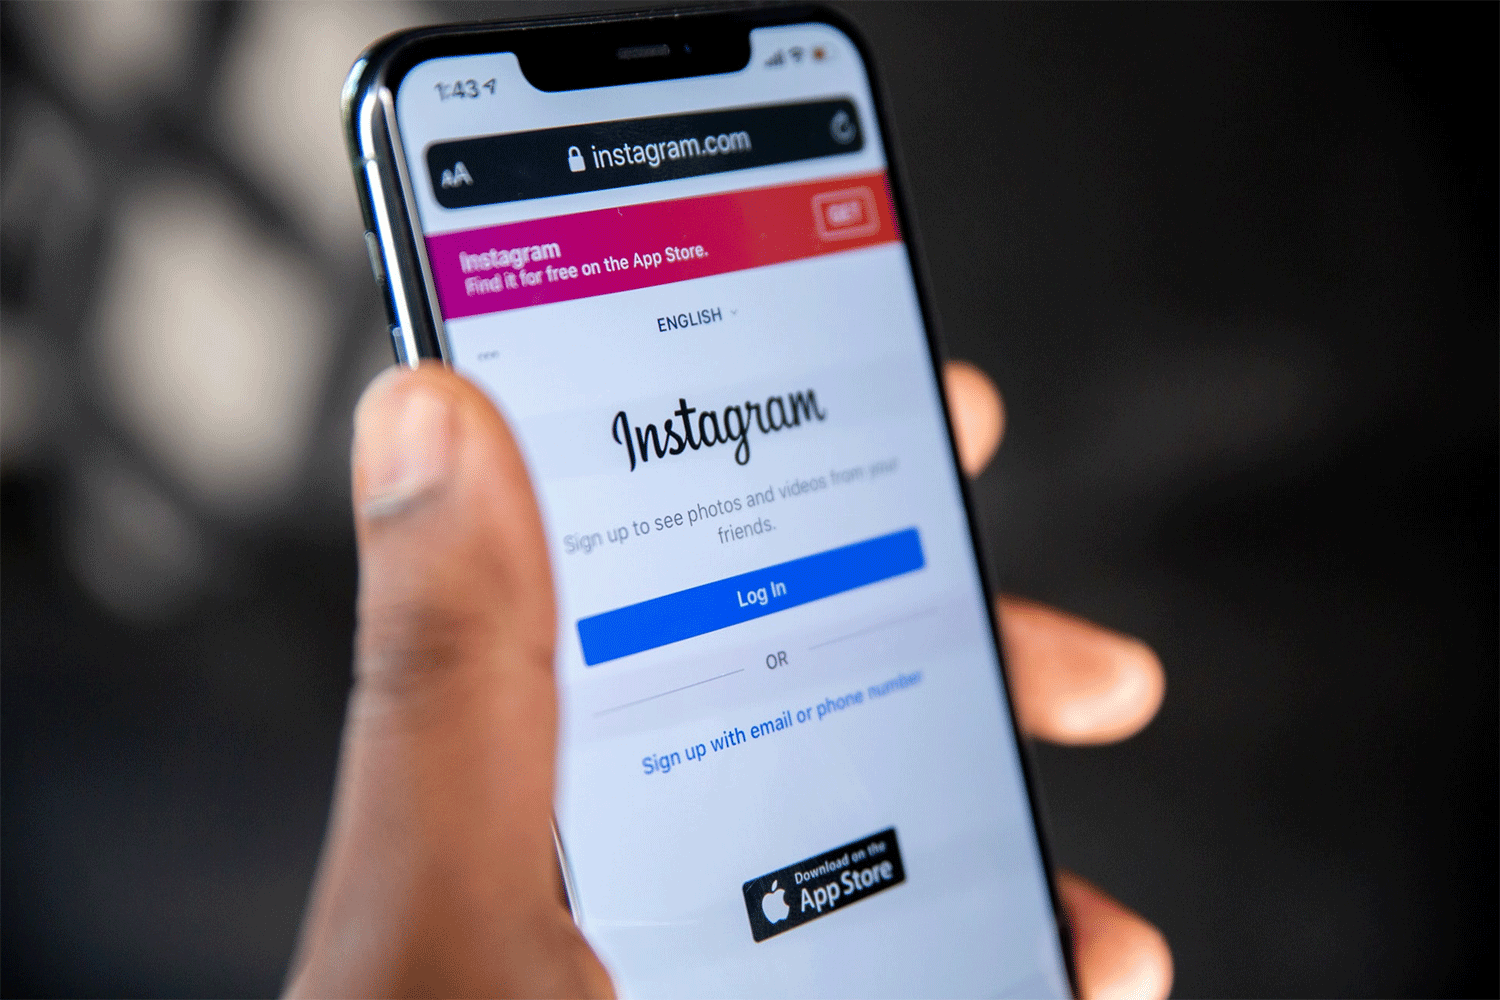 Instagram announces new features to protect youth